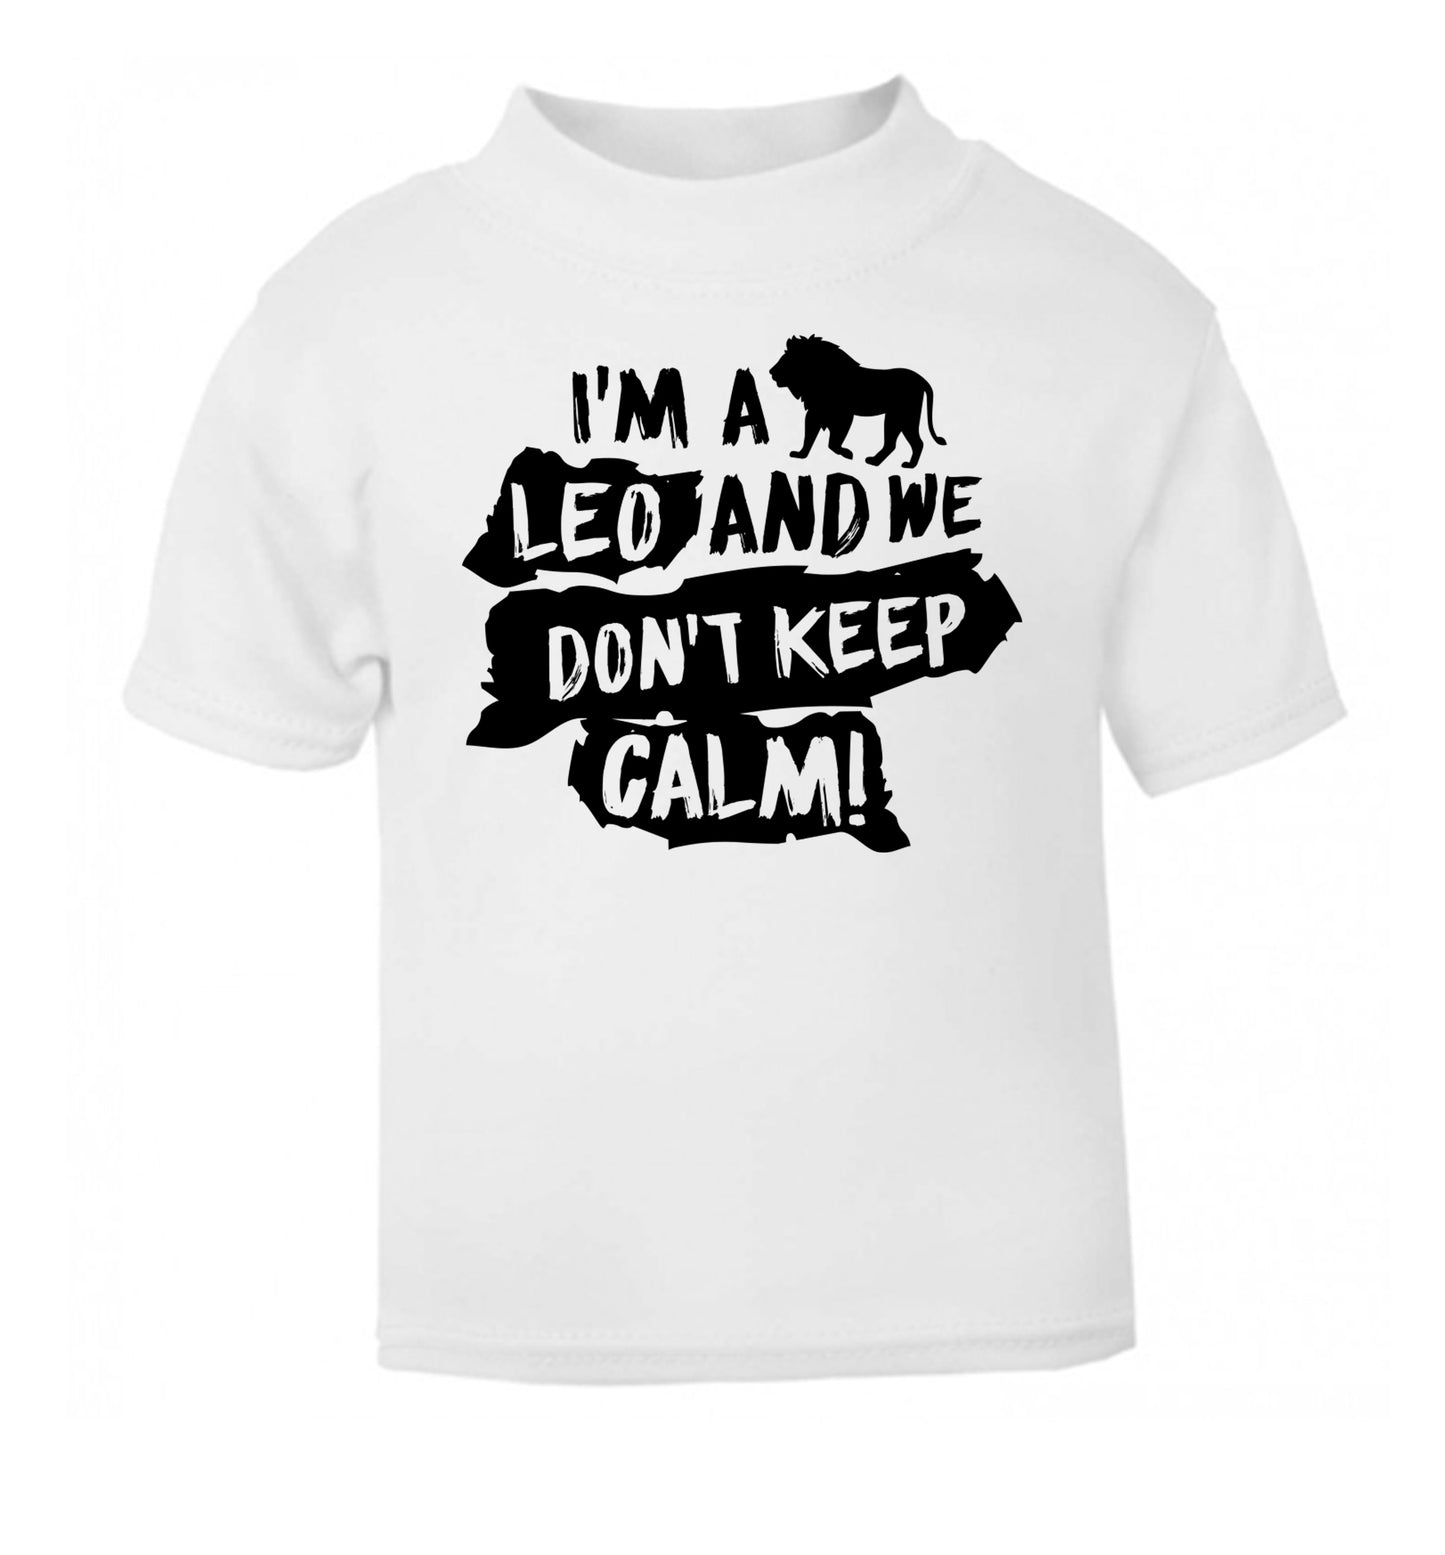 I'm a leo and we don't keep calm! white Baby Toddler Tshirt 2 Years